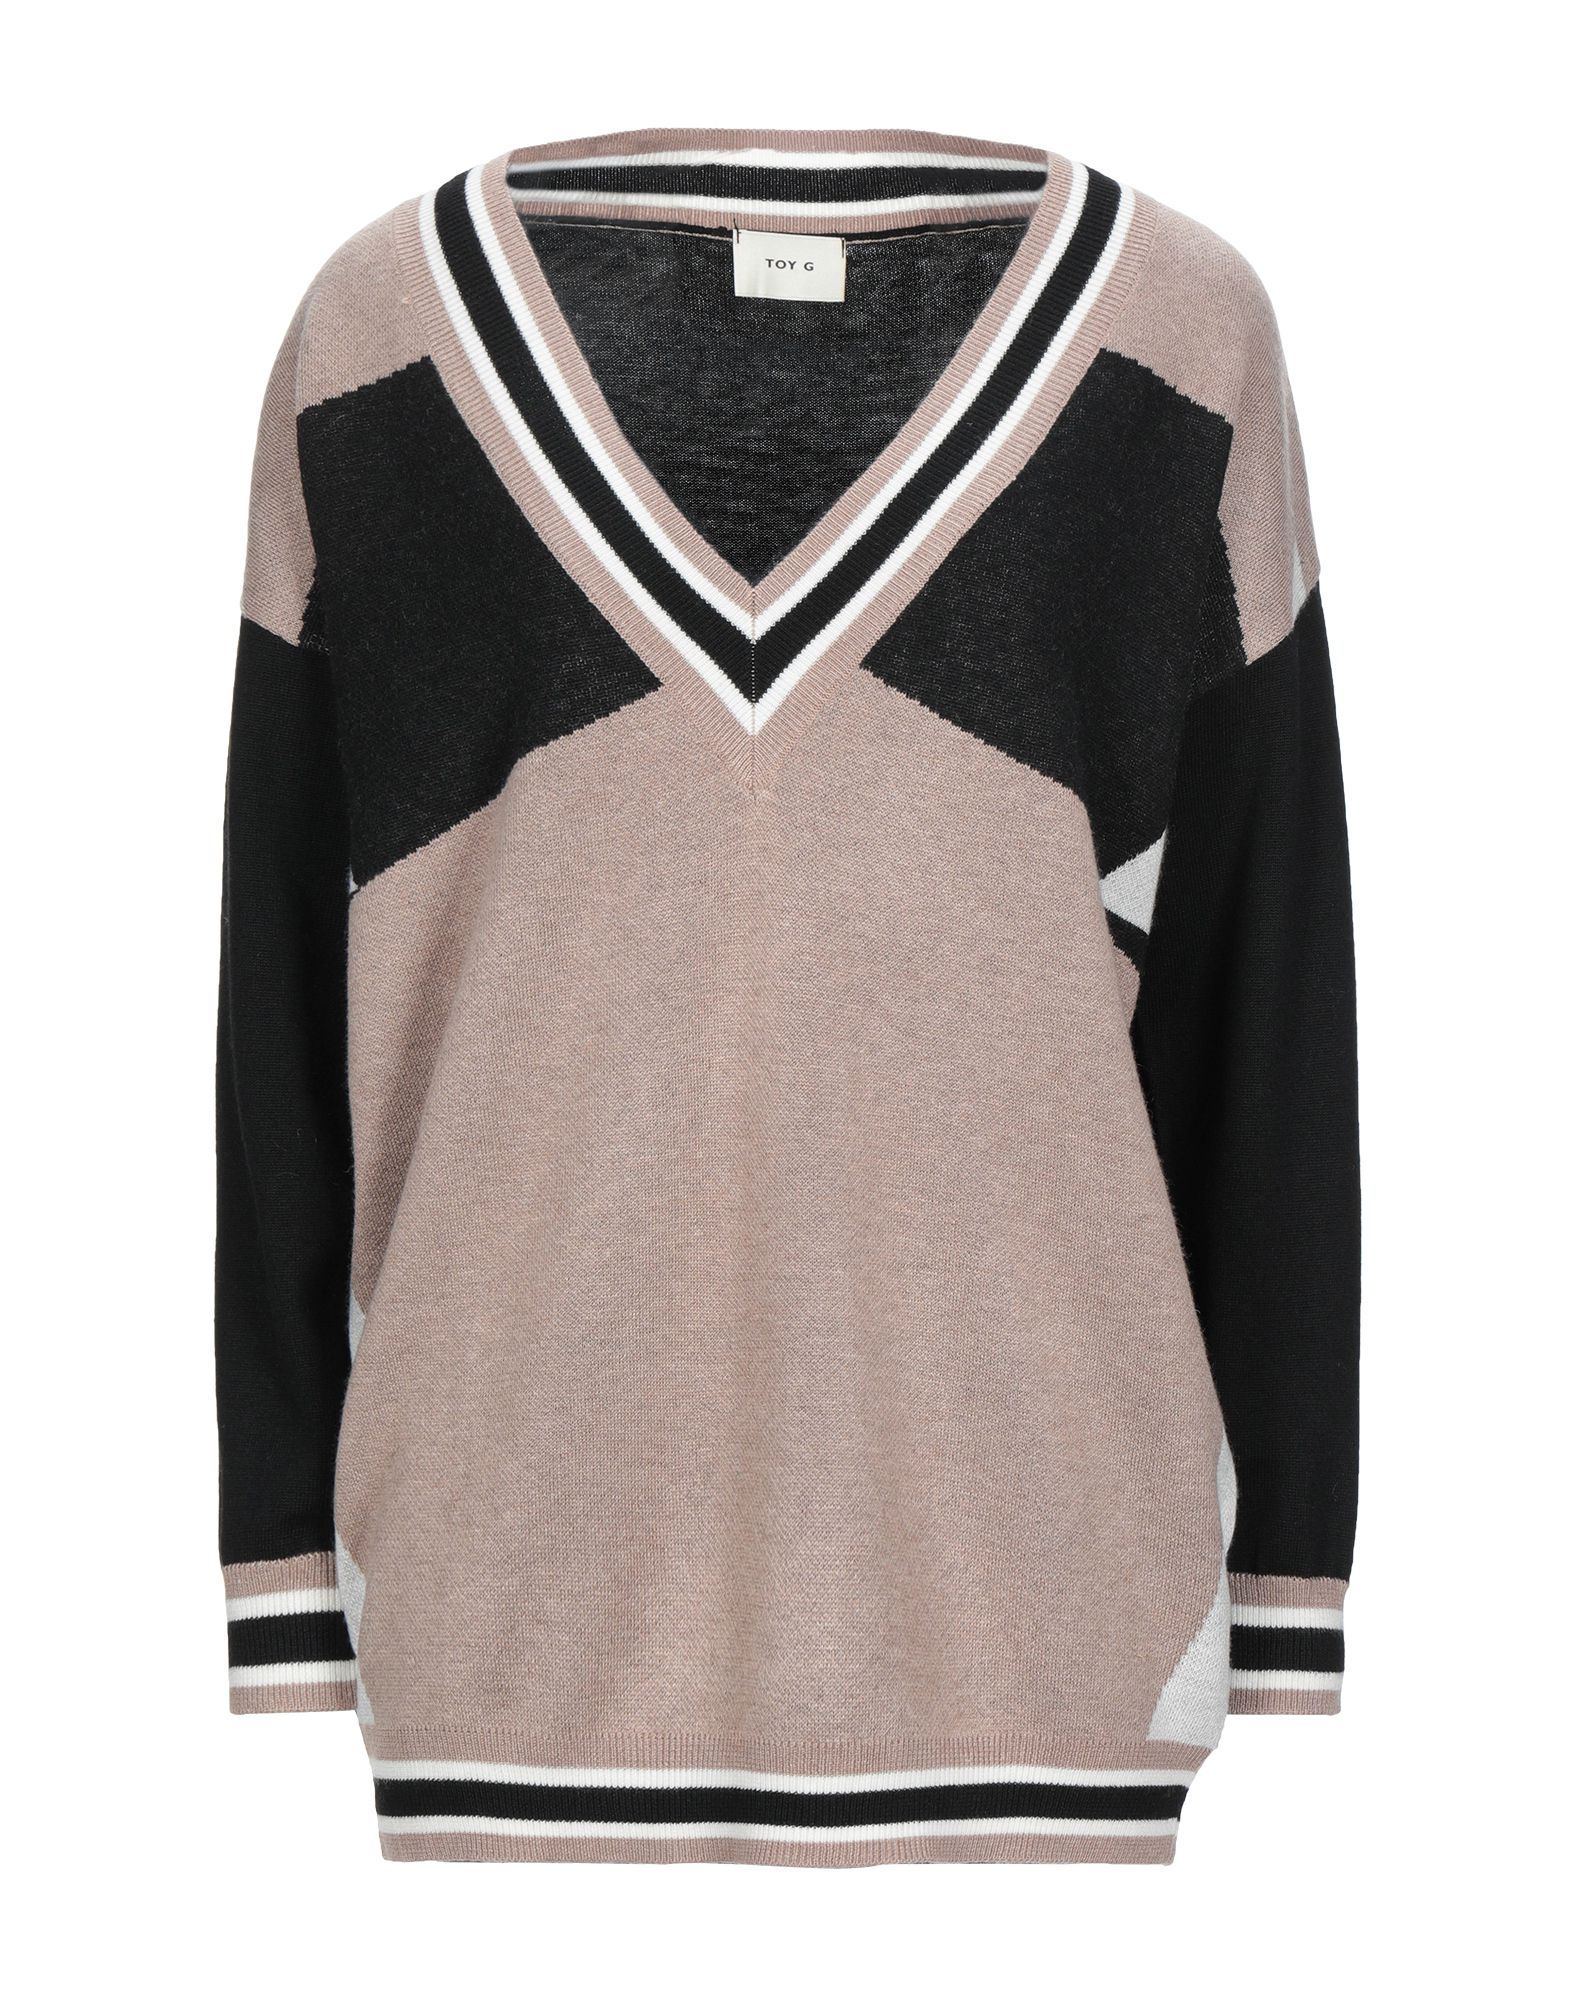 TOY G. Sweaters - Item 14054335